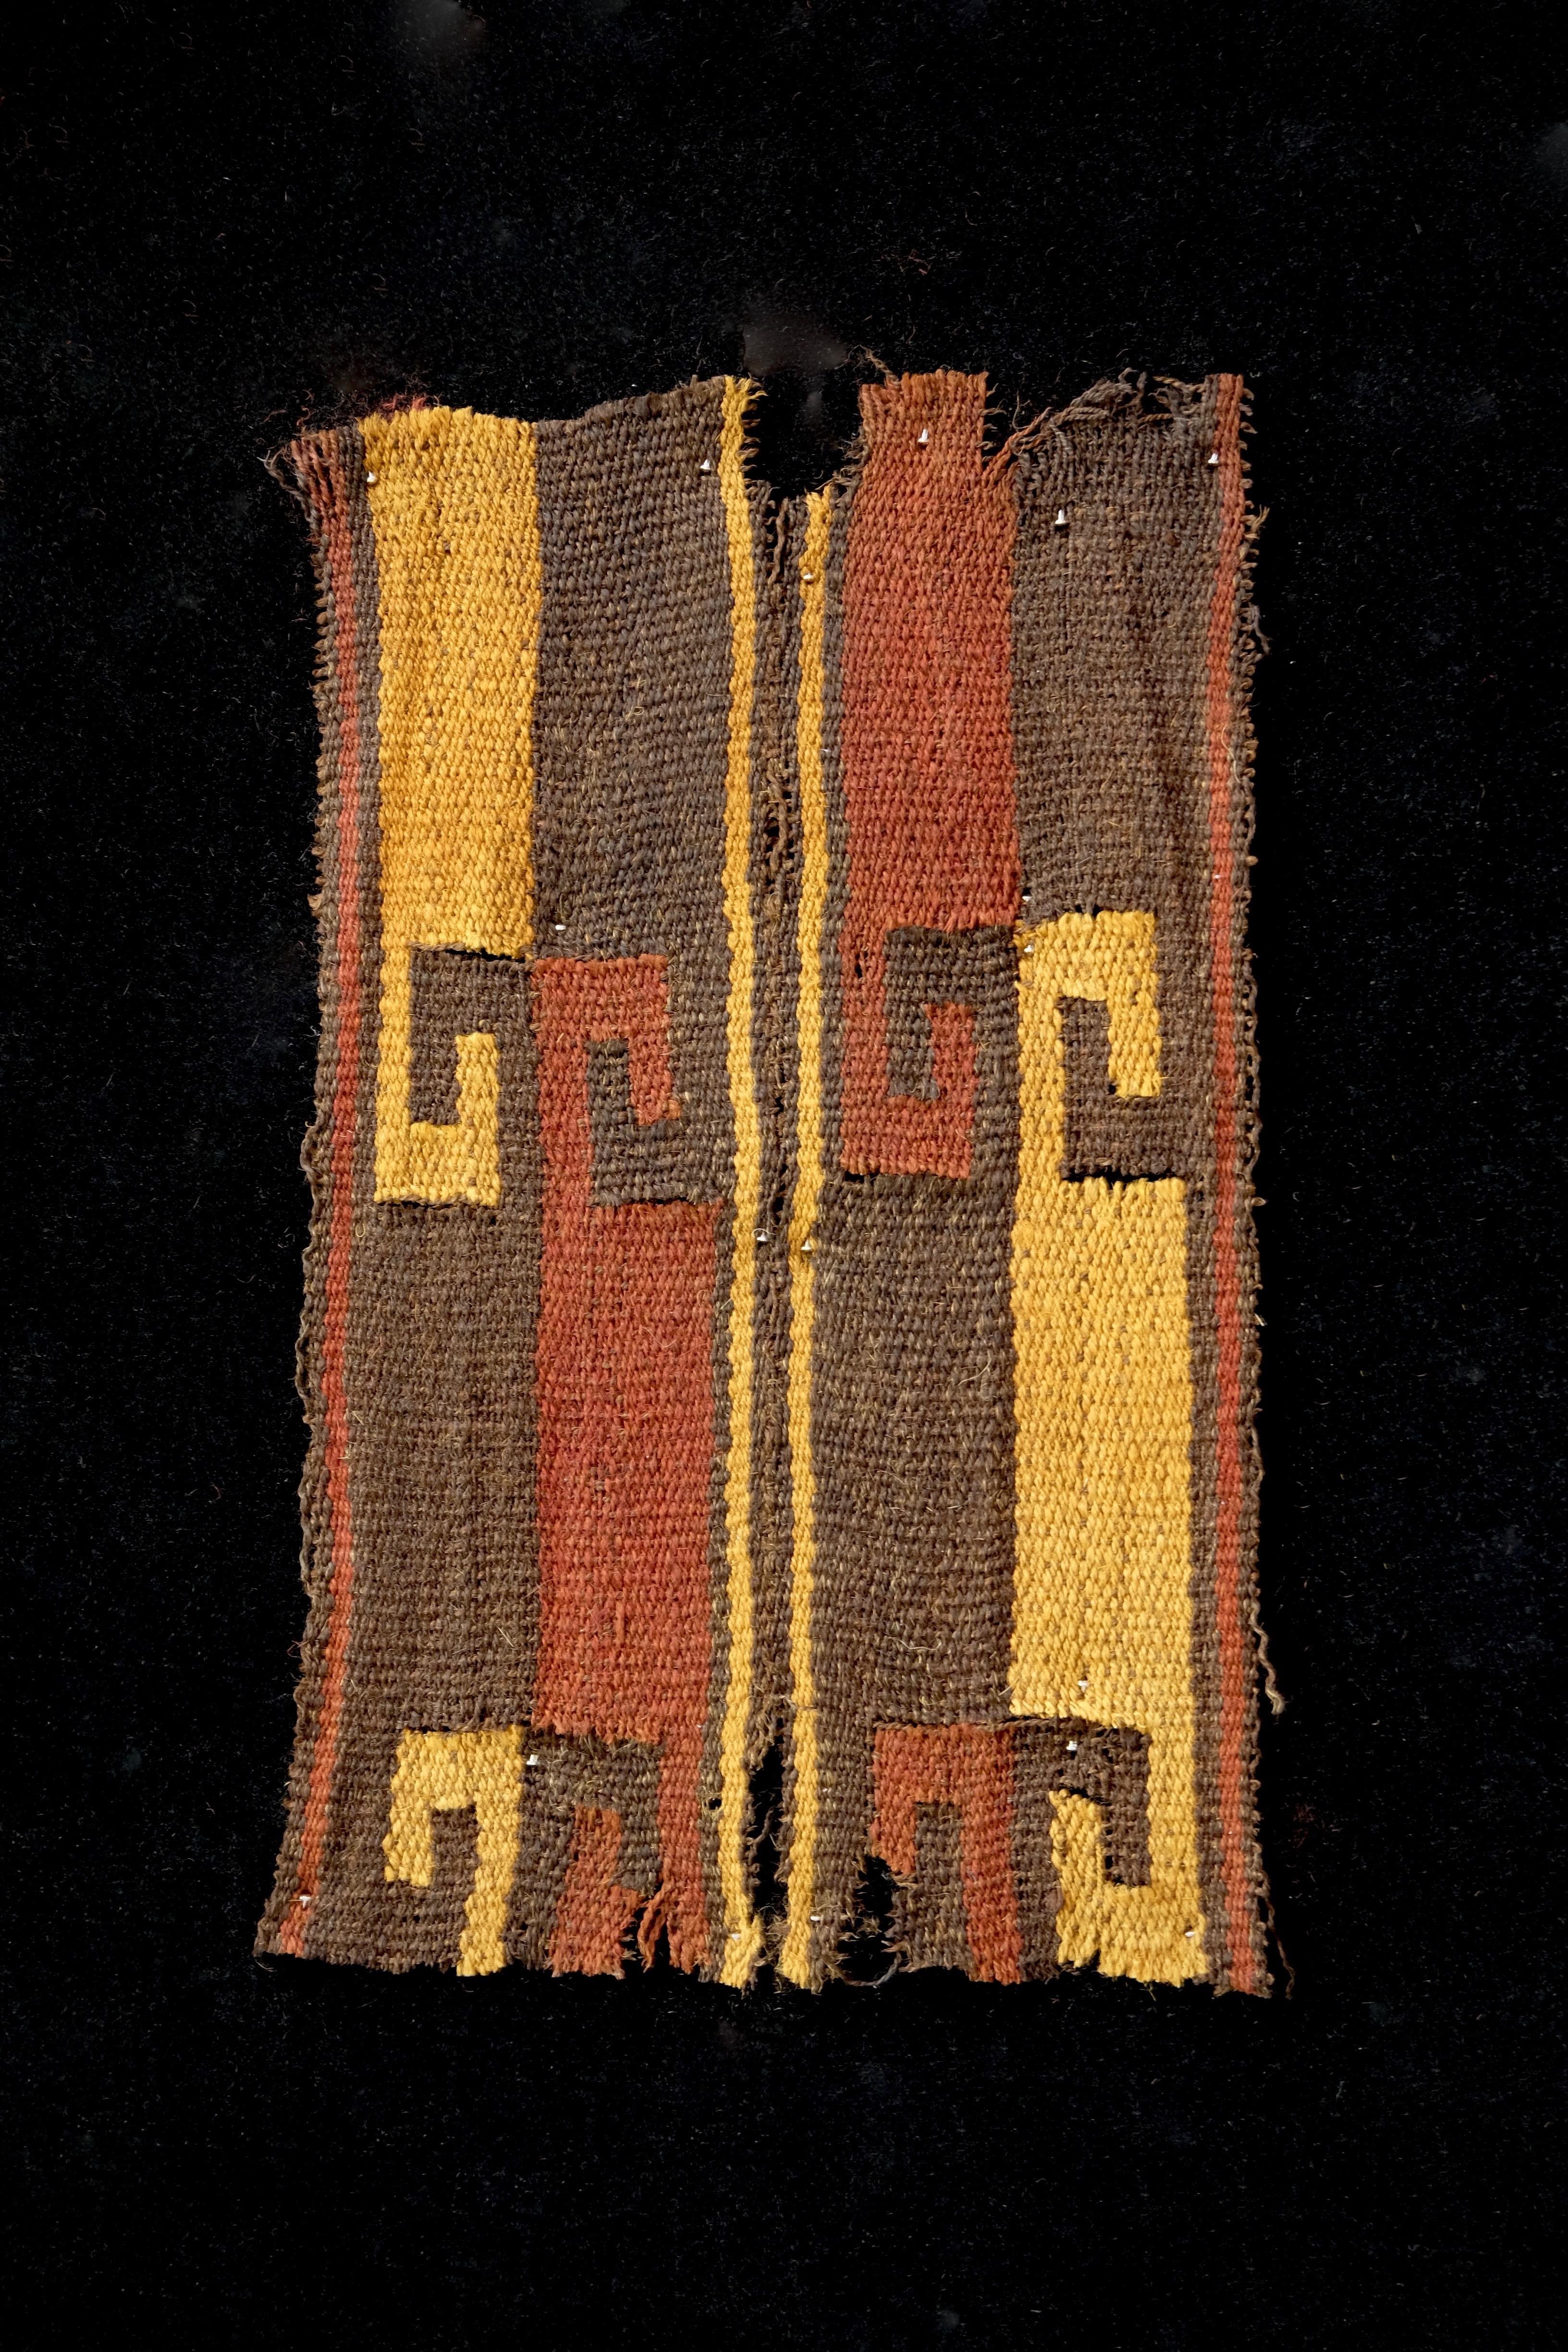 Brown, yellow and red wave like pattern textile fragment. Framed in a black shadowbox.

It is a wonder to behold antiquities such as a Pre-Columbian textiles, an authentic piece of art that has been preserved for centuries and that survives